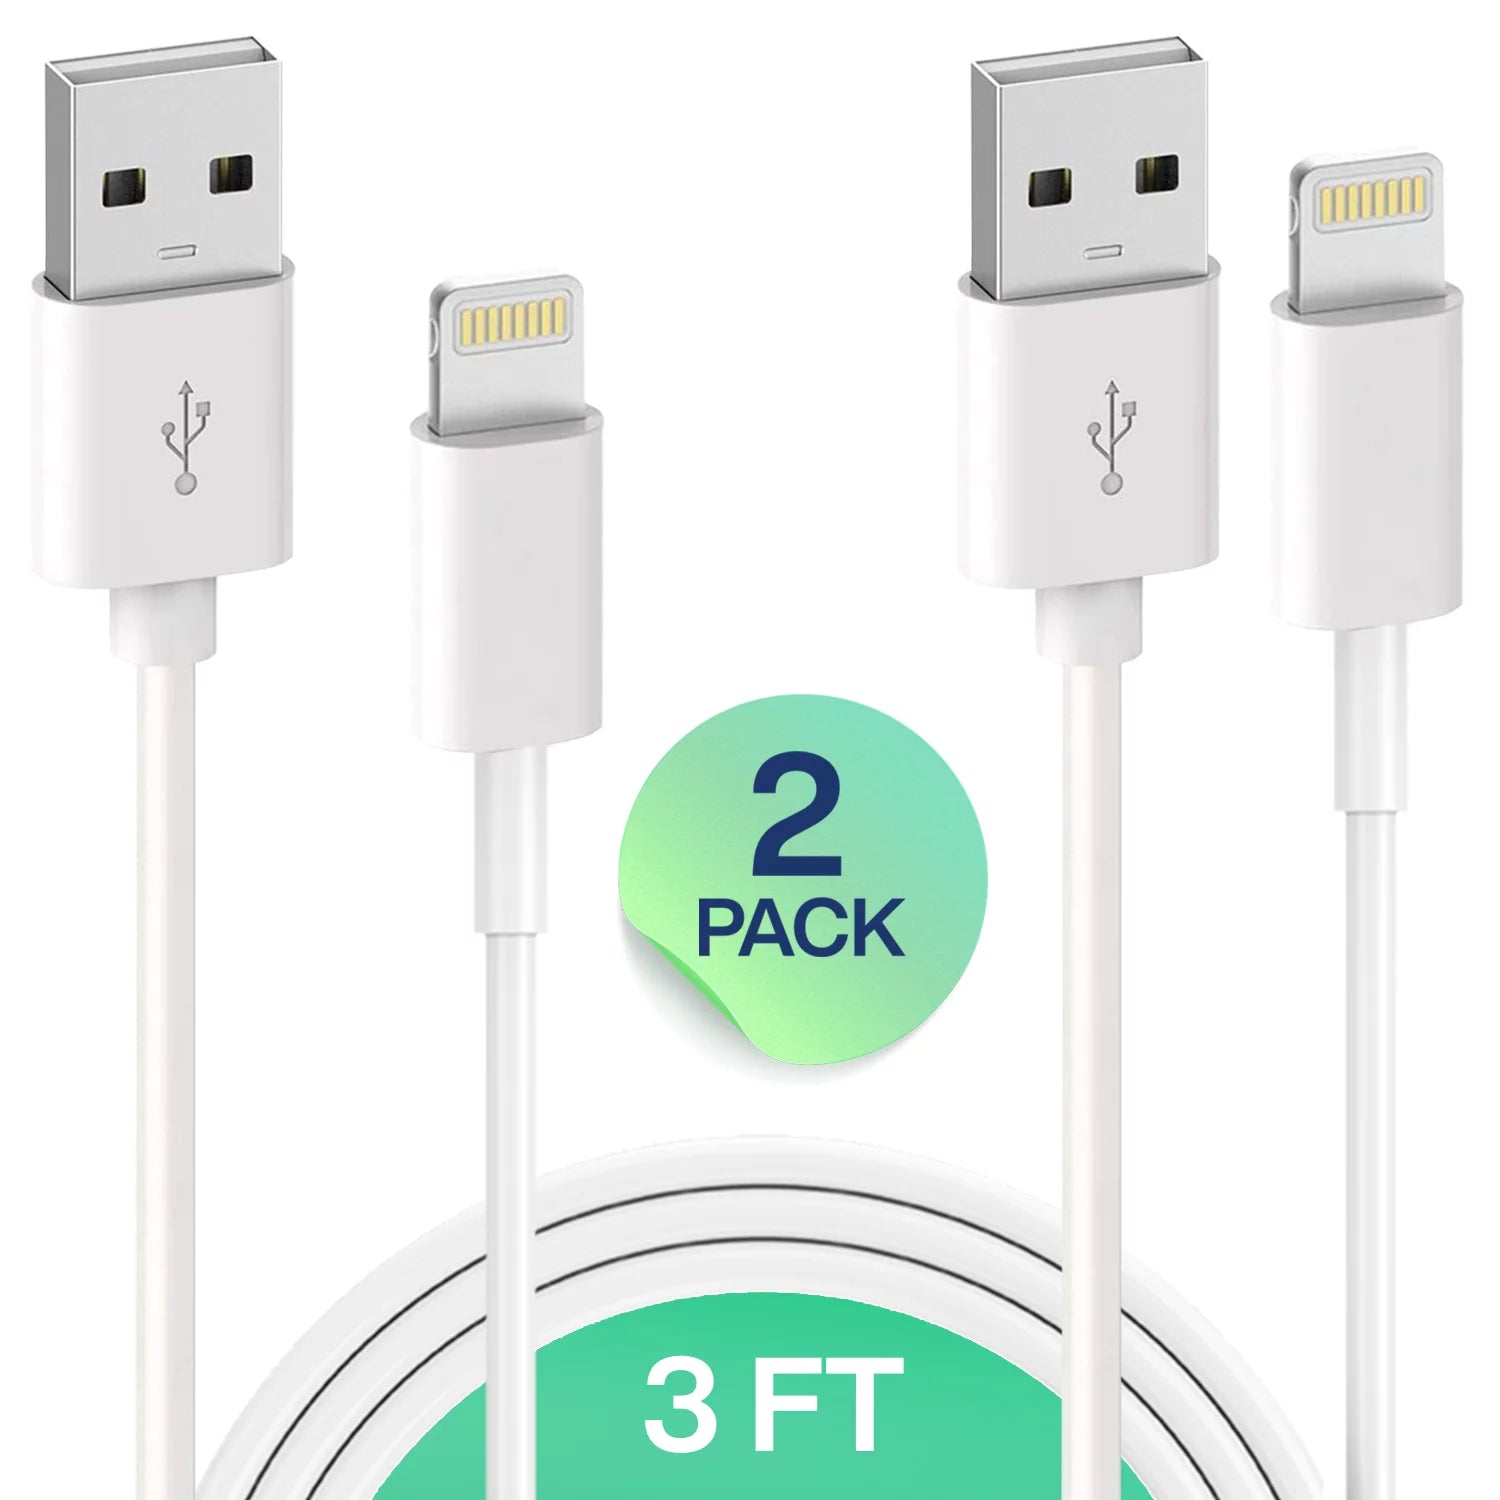 Infinite Power Charger Lightning Cable, 2 Pack 3FT USB Cable, Compatible with iPhone Xs, Xs Max, XR, X, 8, 8 Plus, 7, 7 Plus, 6S, 6S Plus,iPad Air, Mini, iPod Touch, Case, Charging & Syncing Cord